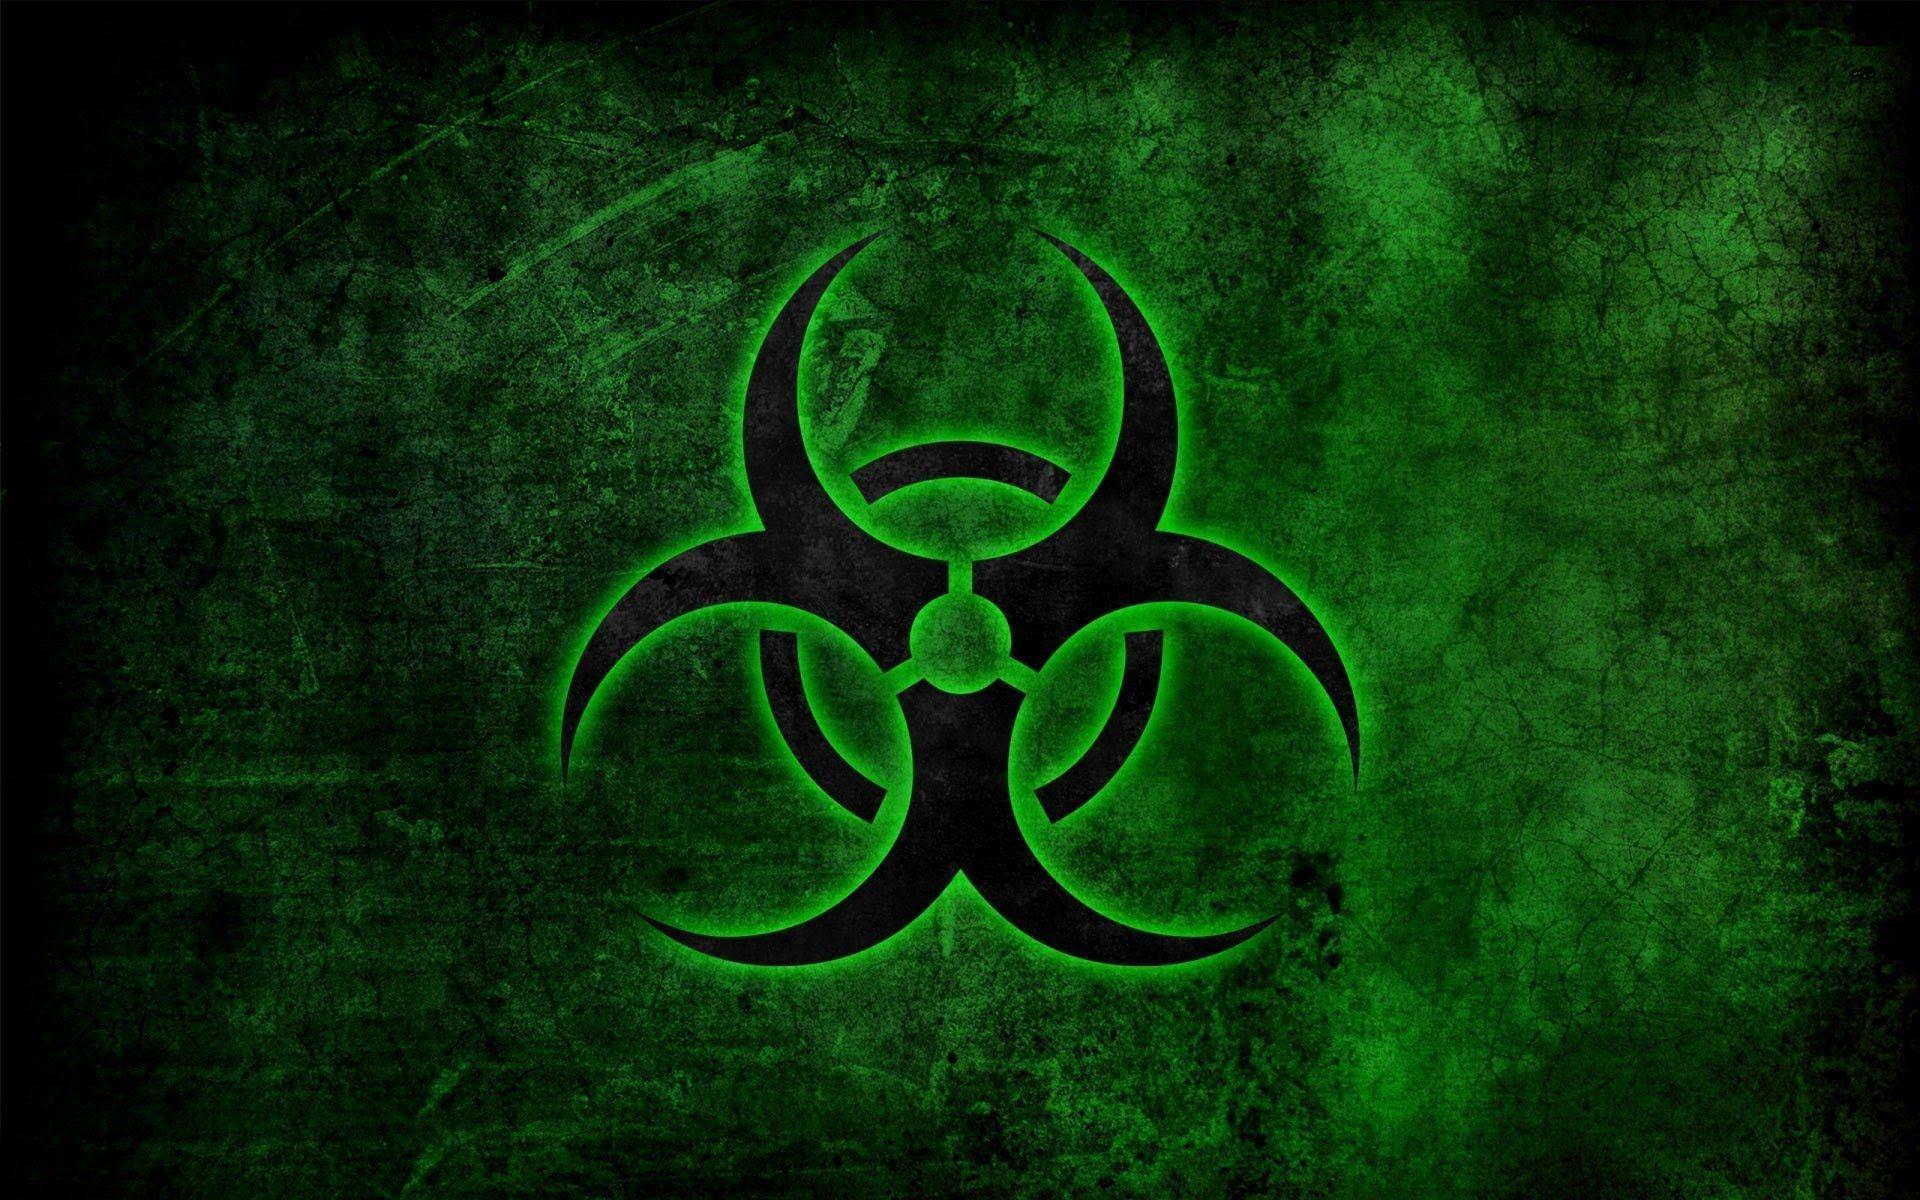 Cool Radioactive Logo - Image result for radioactive symbol. Symbols of Our Time. Symbols